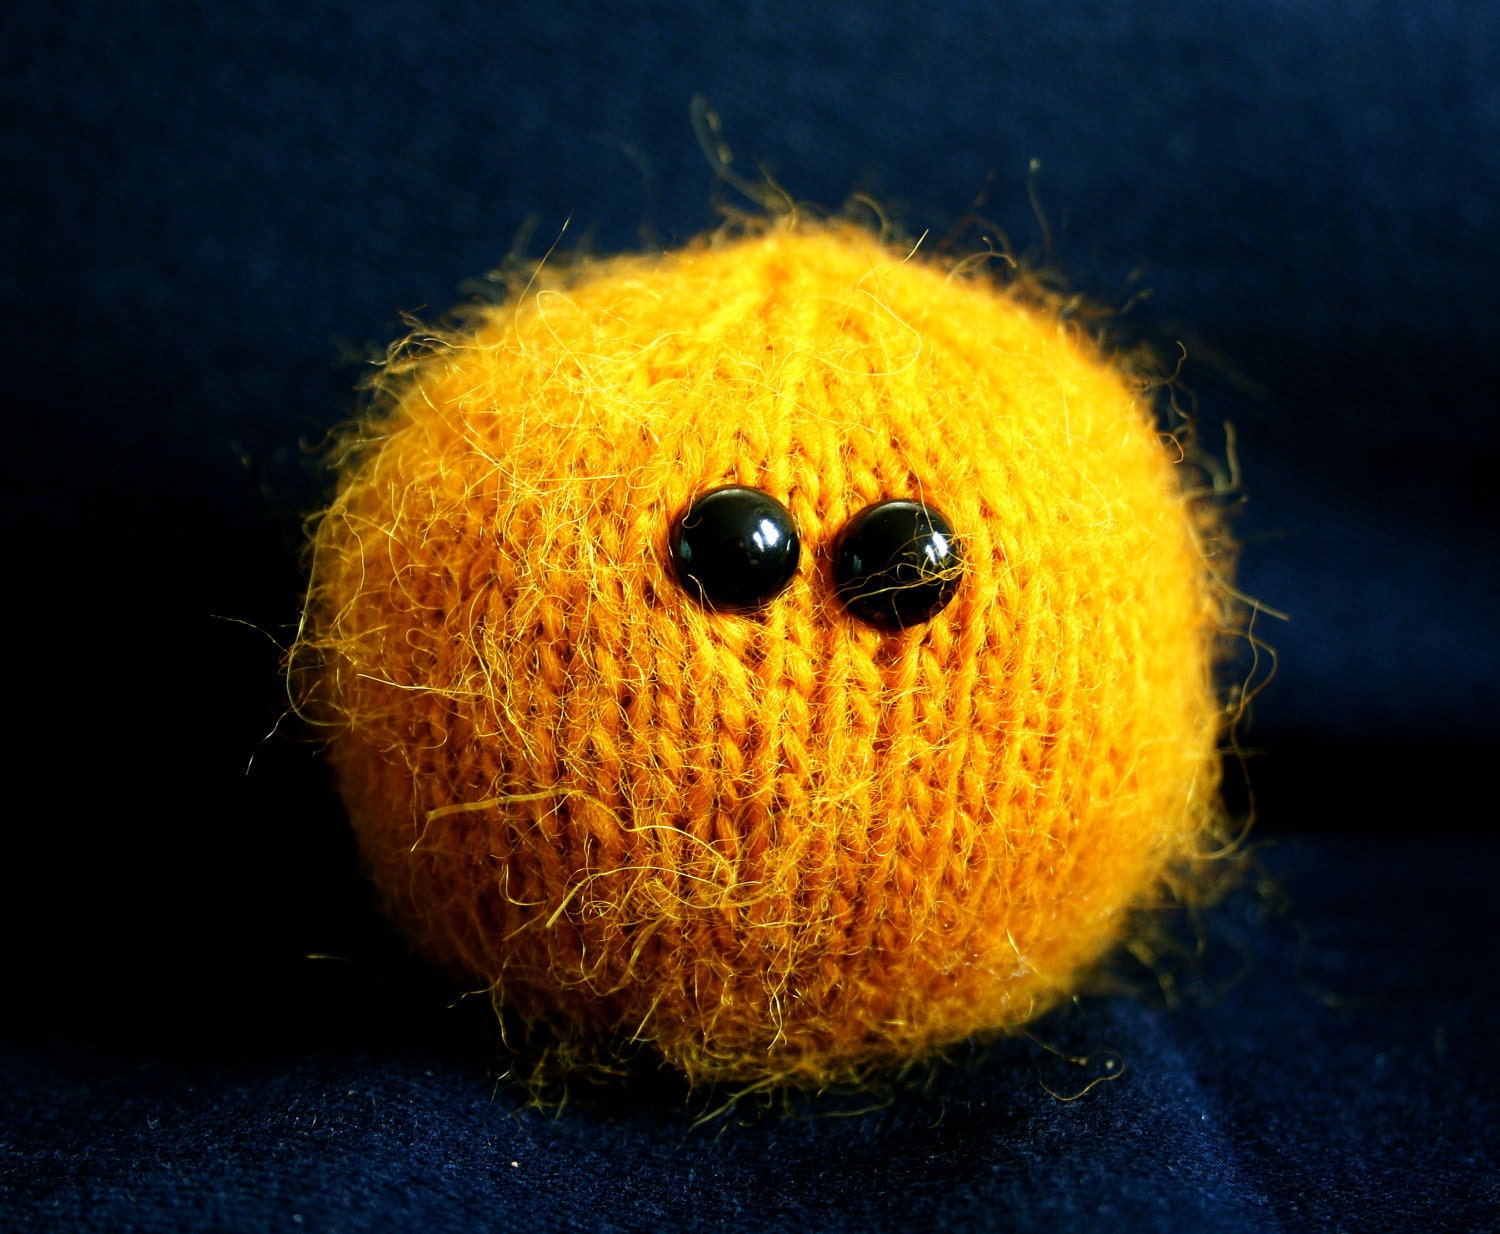 Knit your own Little Sun with Corona (pdf knitting pattern)